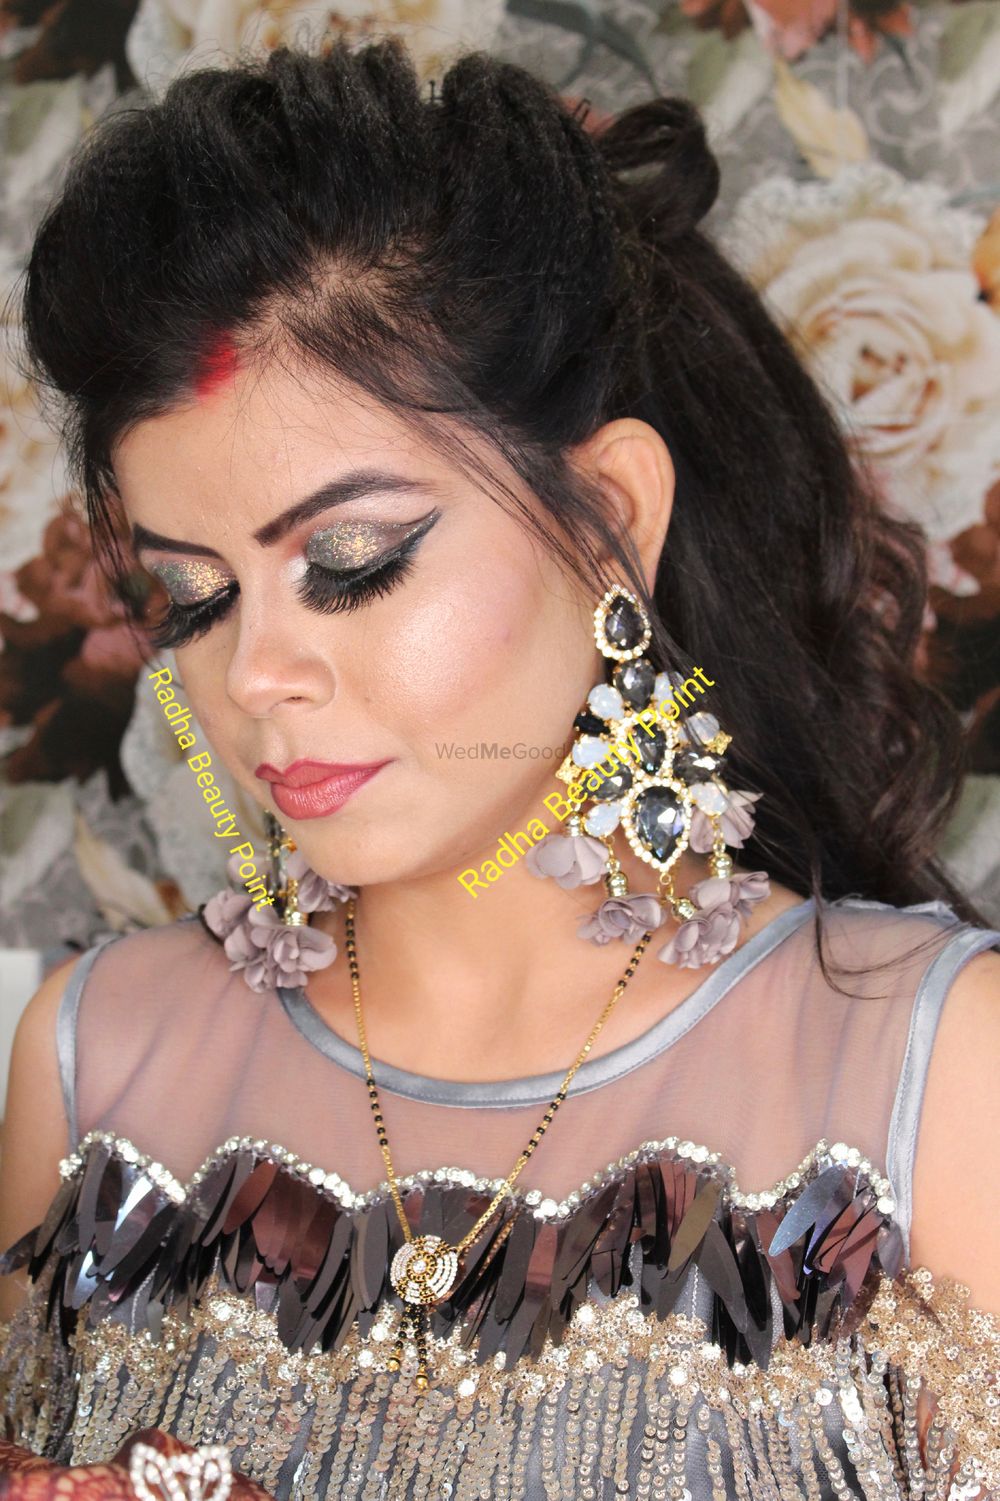 Photo From Glam Makeup - By Radha Beauty Point